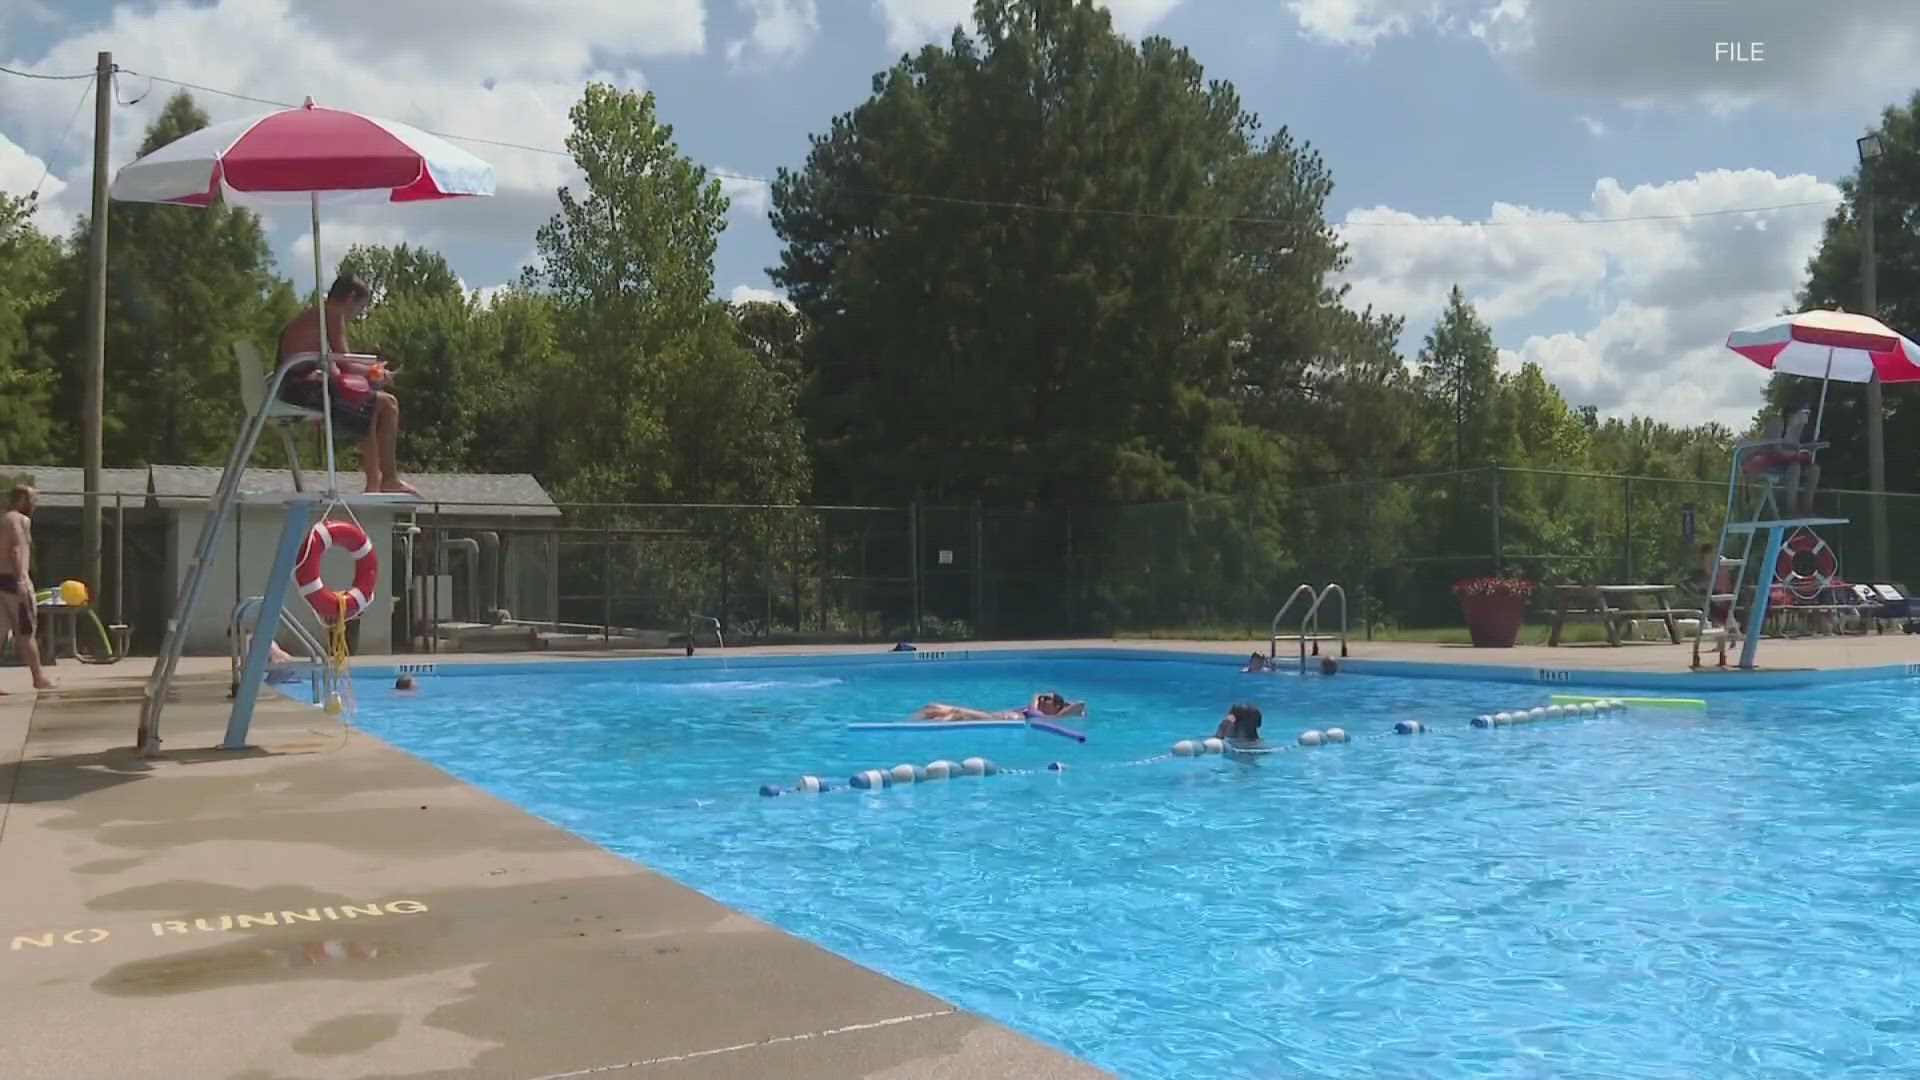 The Louisville Mom Collective has some tips on how to enjoy pools and splashpads around town without spending too much money.